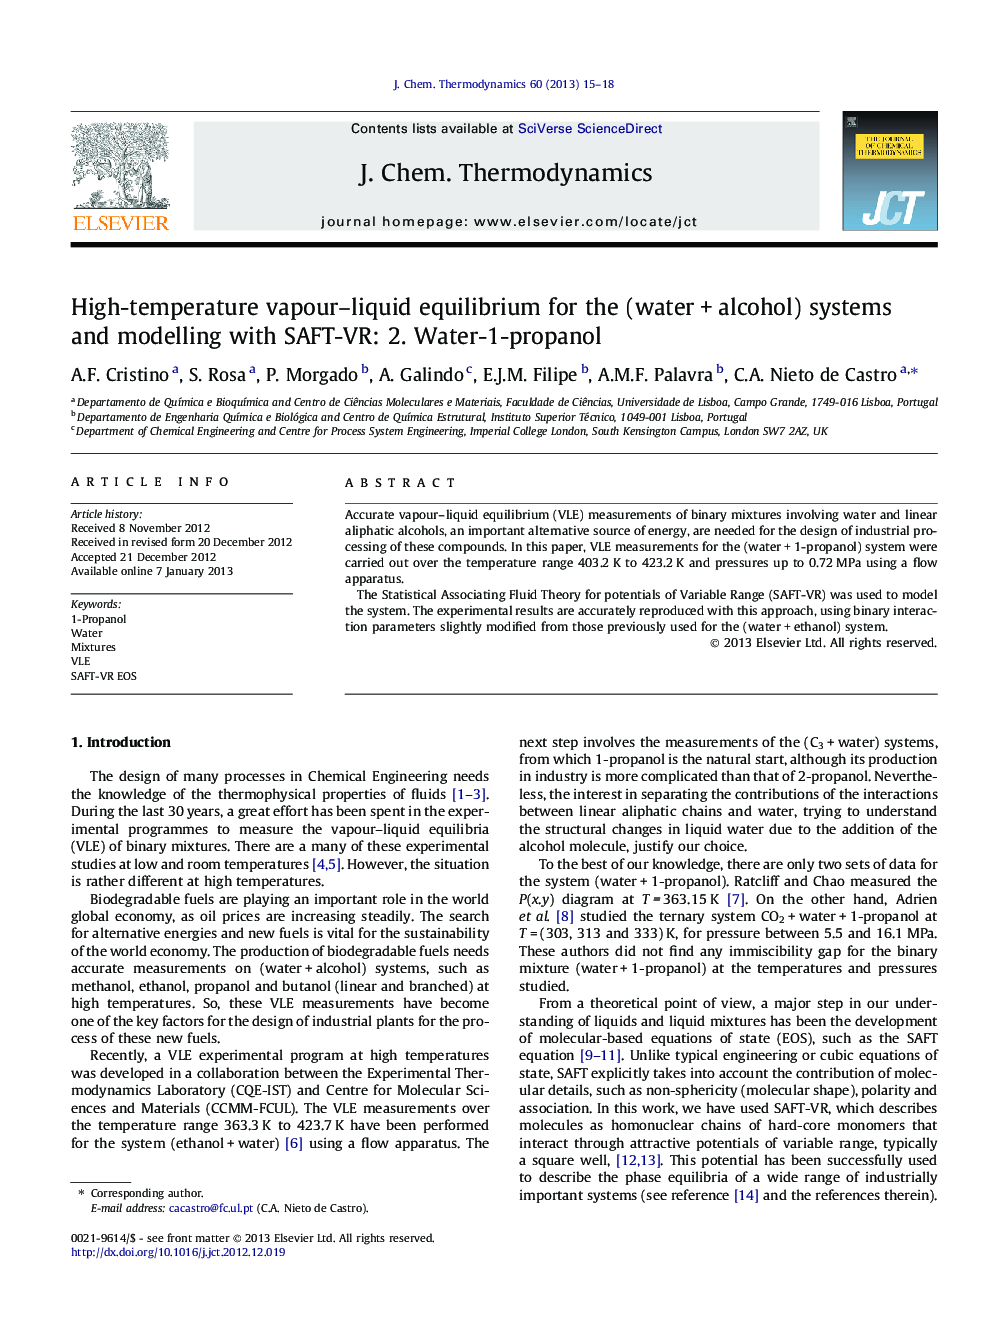 High-temperature vapour–liquid equilibrium for the (water + alcohol) systems and modelling with SAFT-VR: 2. Water-1-propanol